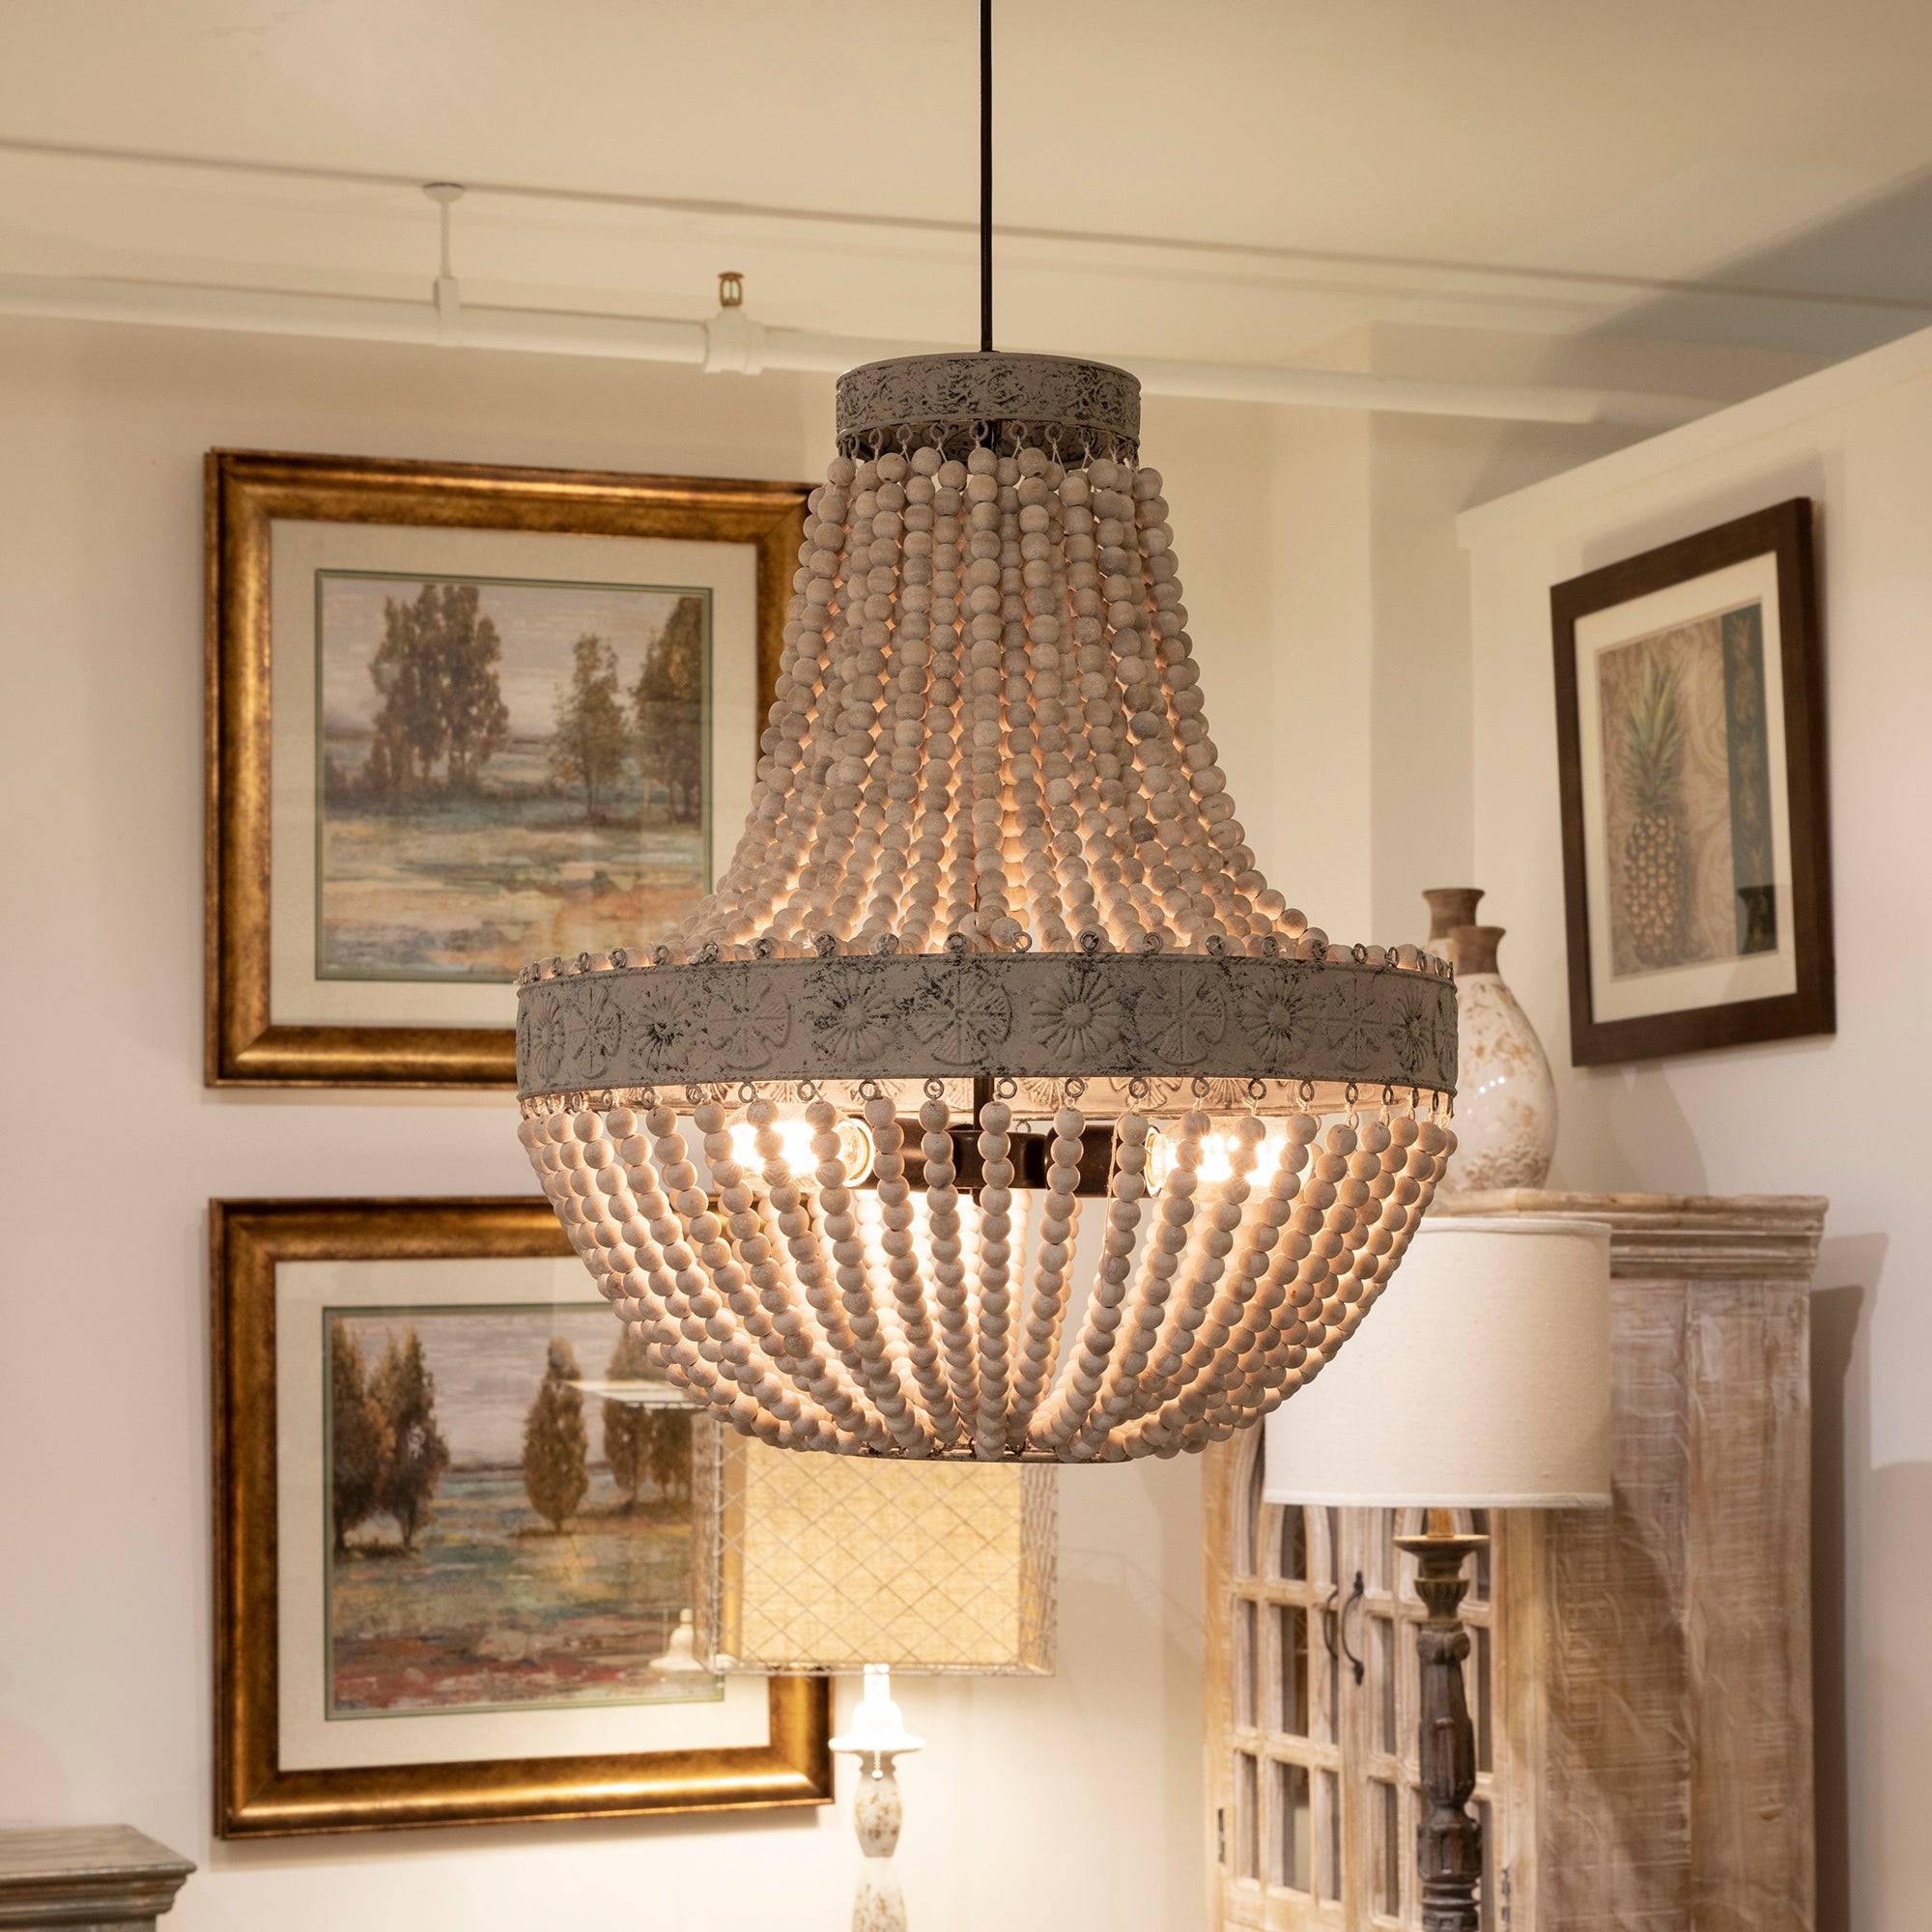 Beaded chandelier for a touch of charm from Pier1